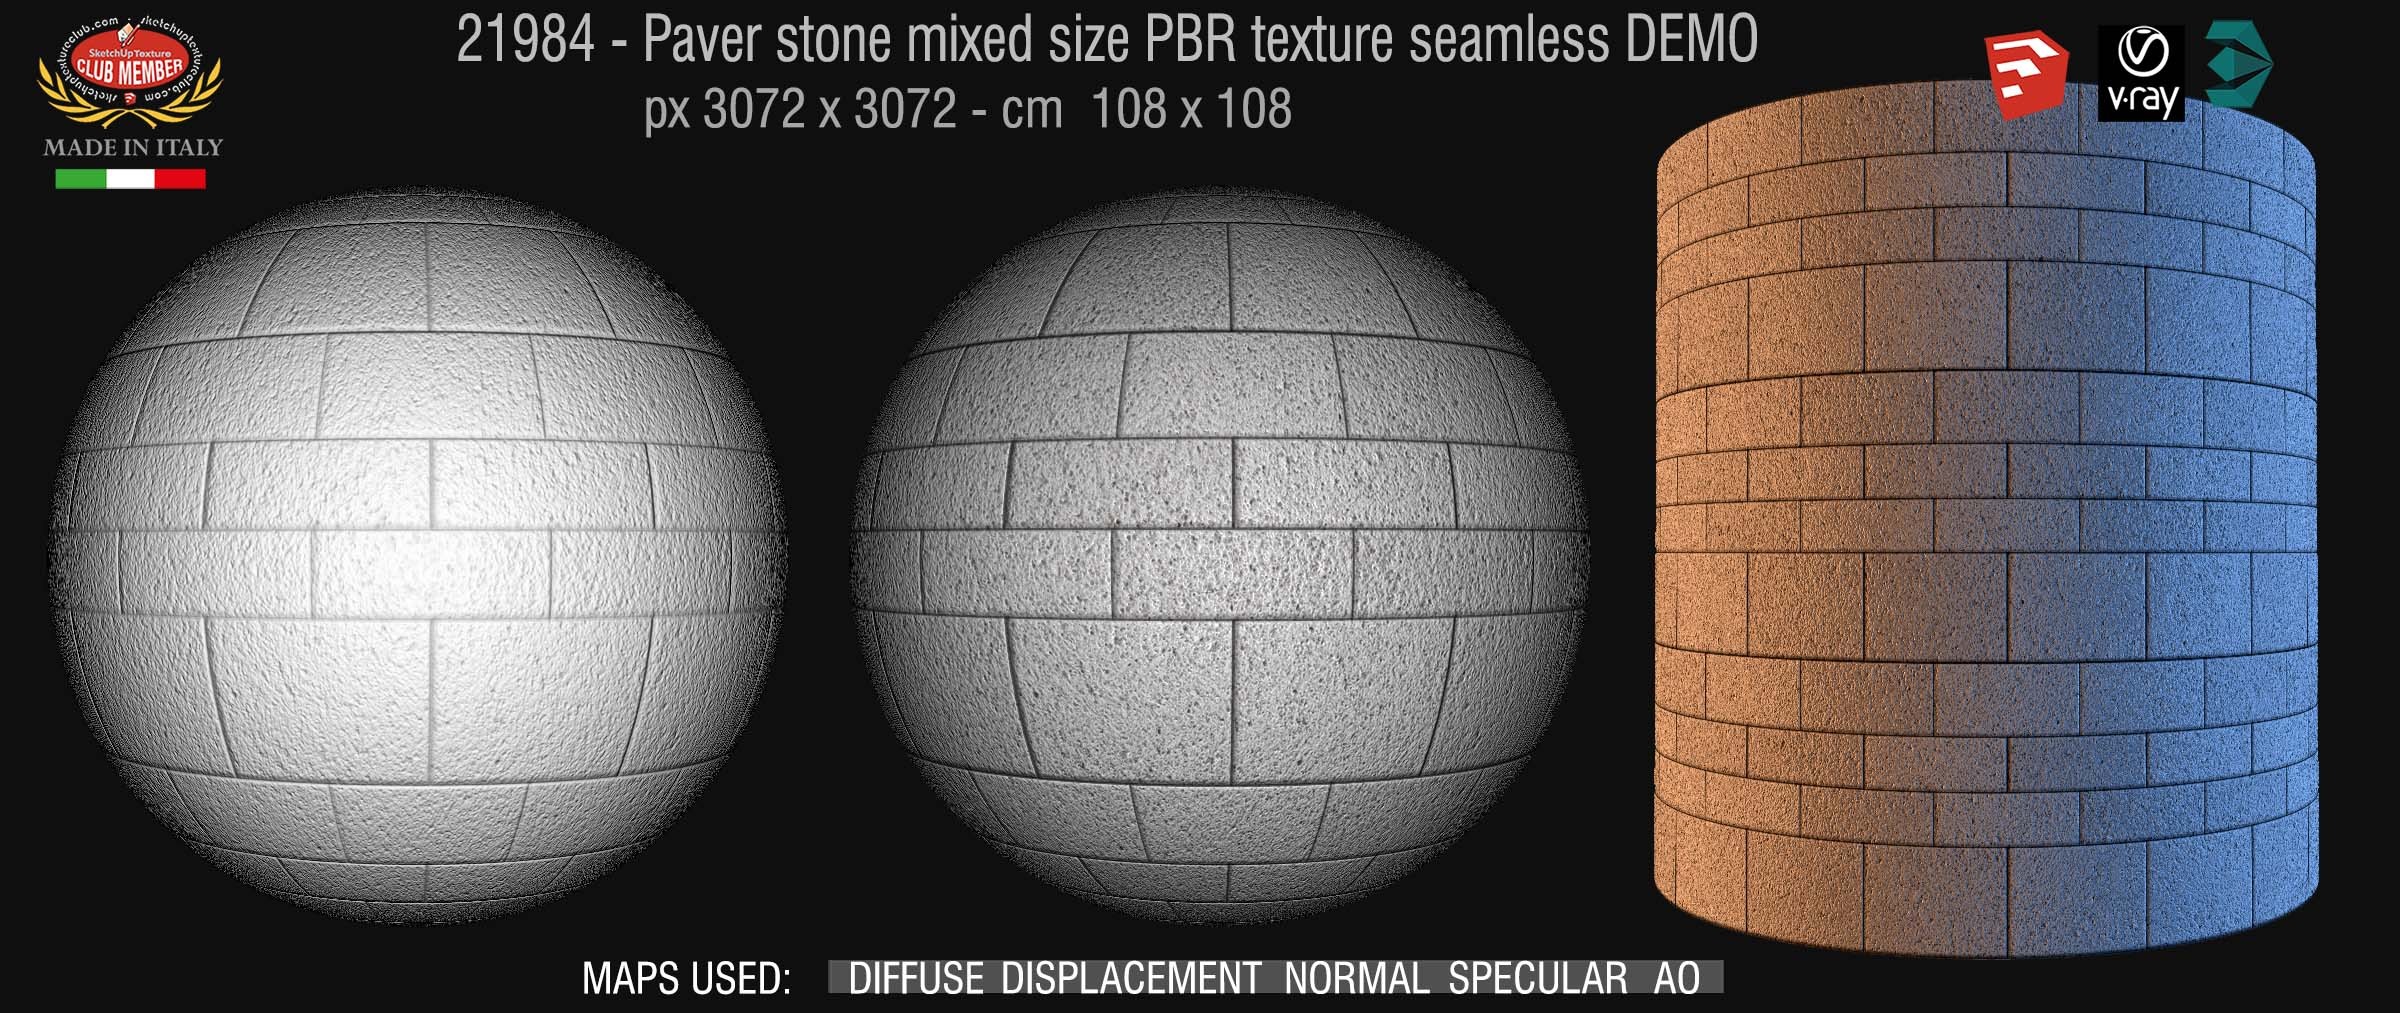 21984 pavers stone mixed size PBR texture seamless DEMO